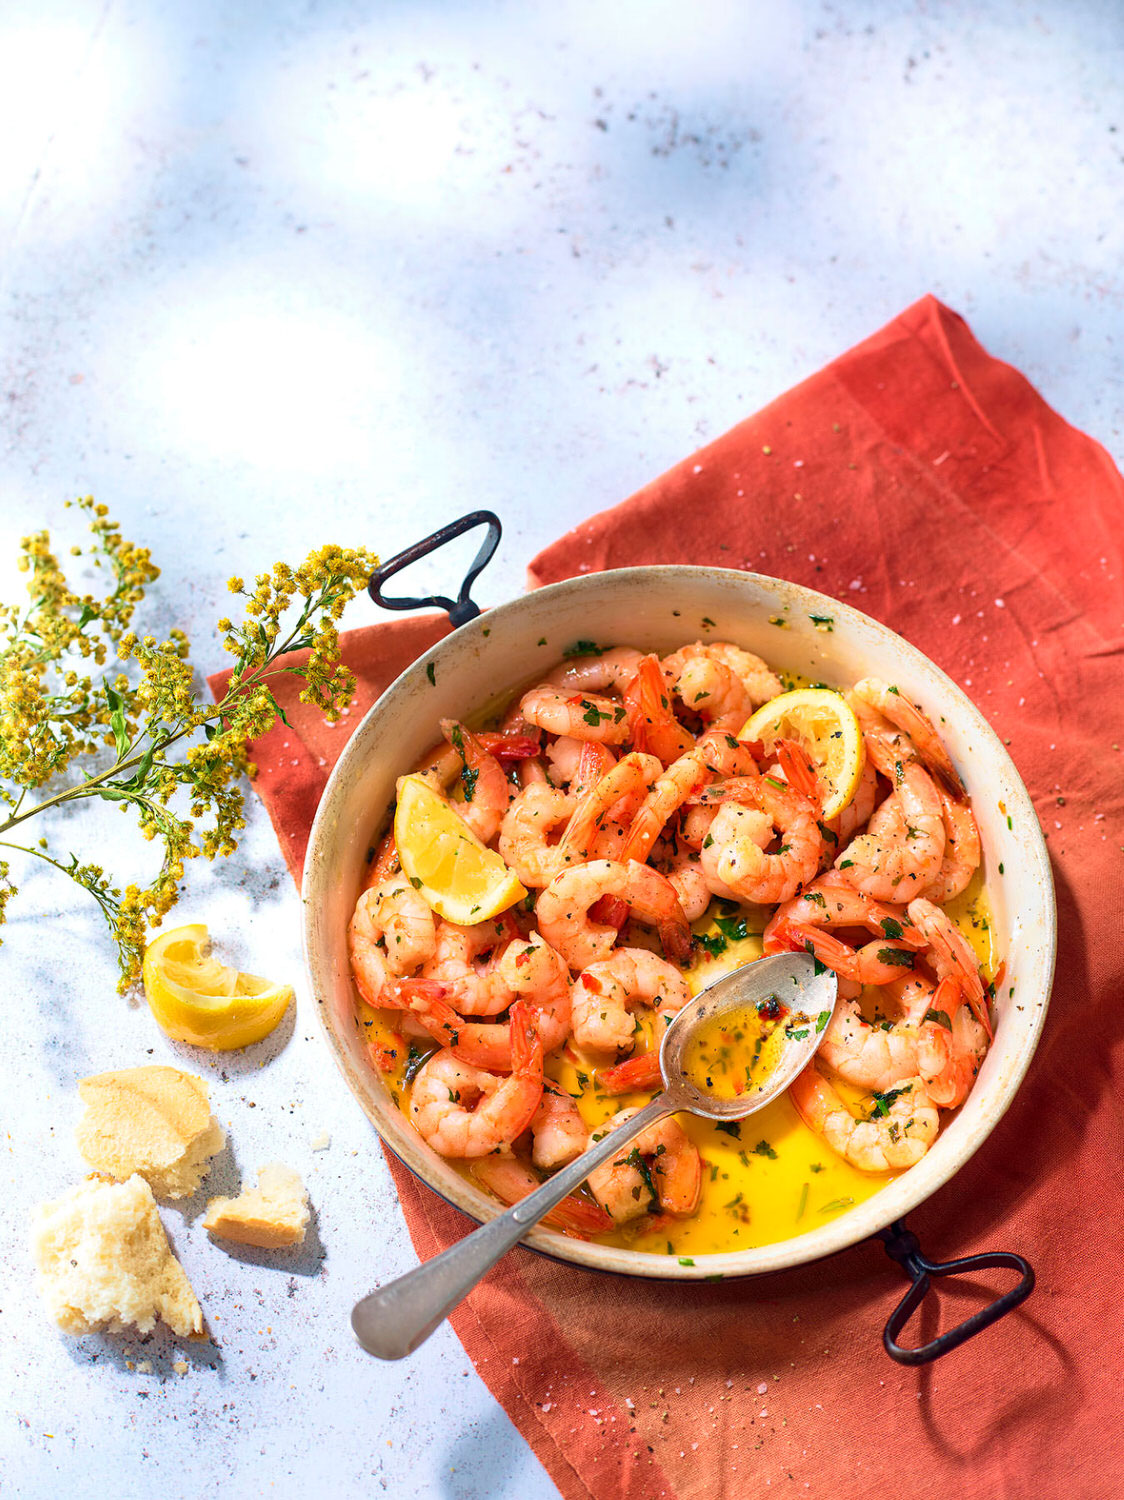 Garlic and Chilli Prawns served in a large skillet with crusty bread and lemon wedges. - London Food & Drinks Photographer